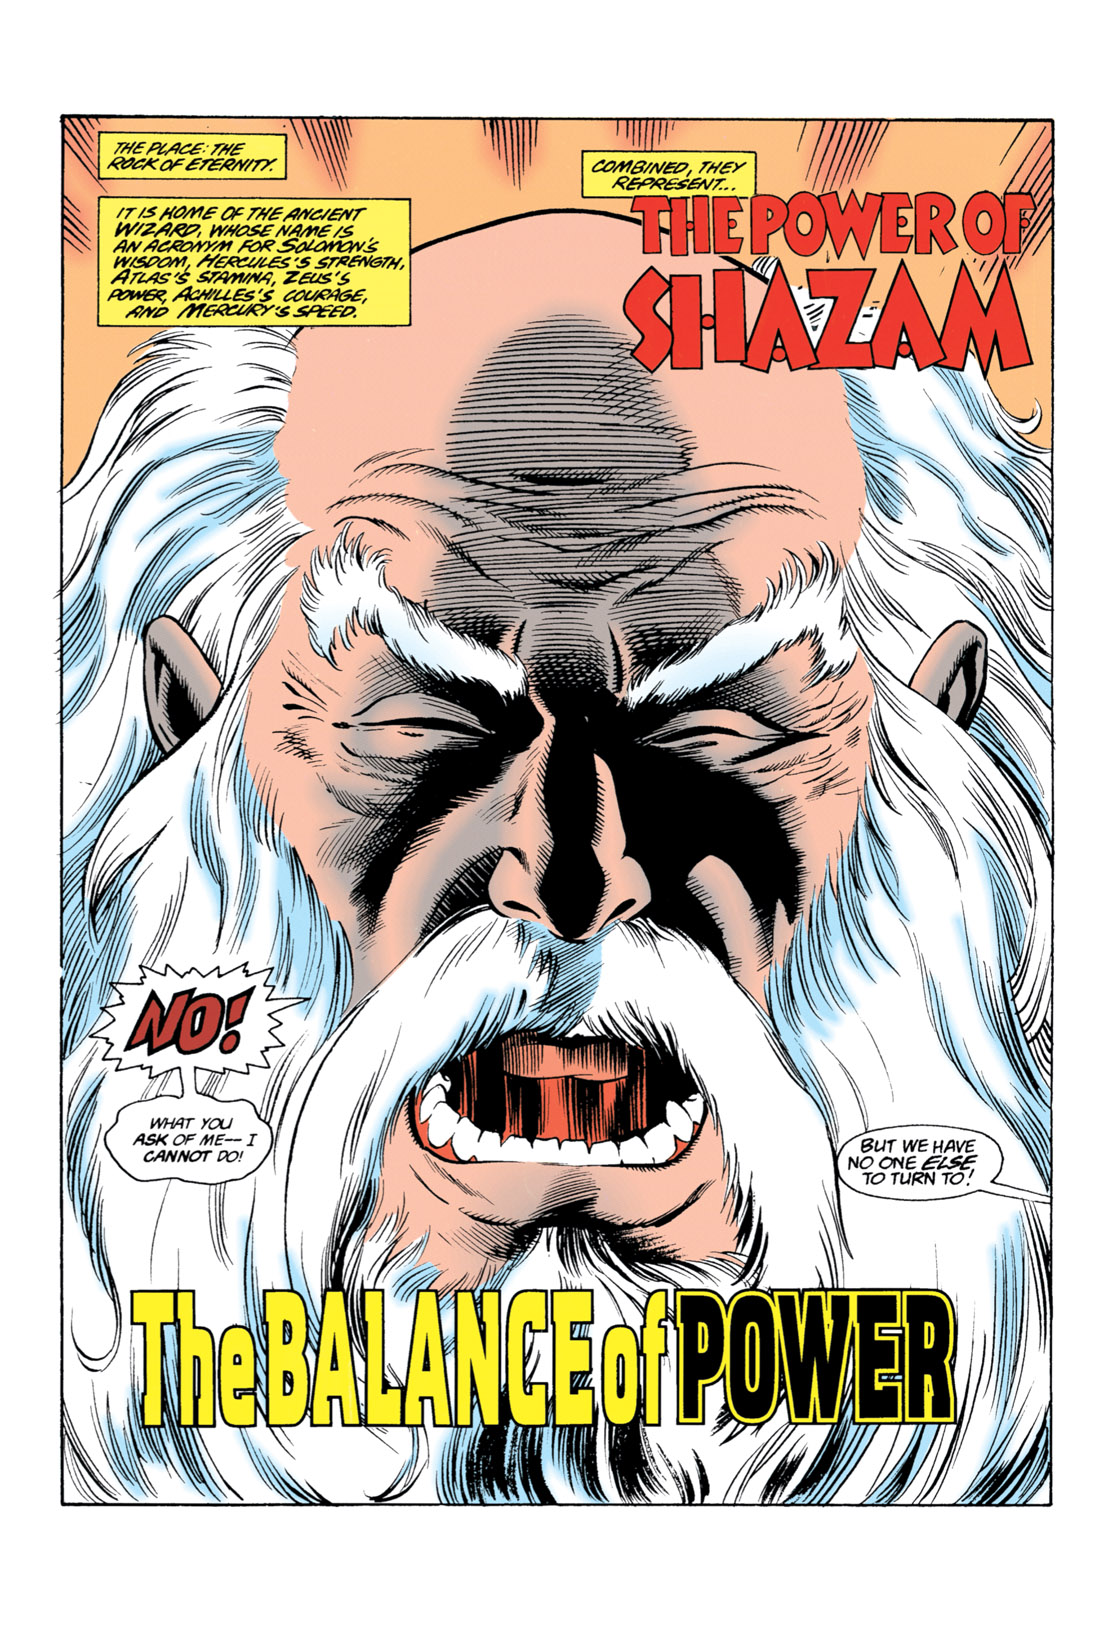 Read online The Power of SHAZAM! comic -  Issue #7 - 2